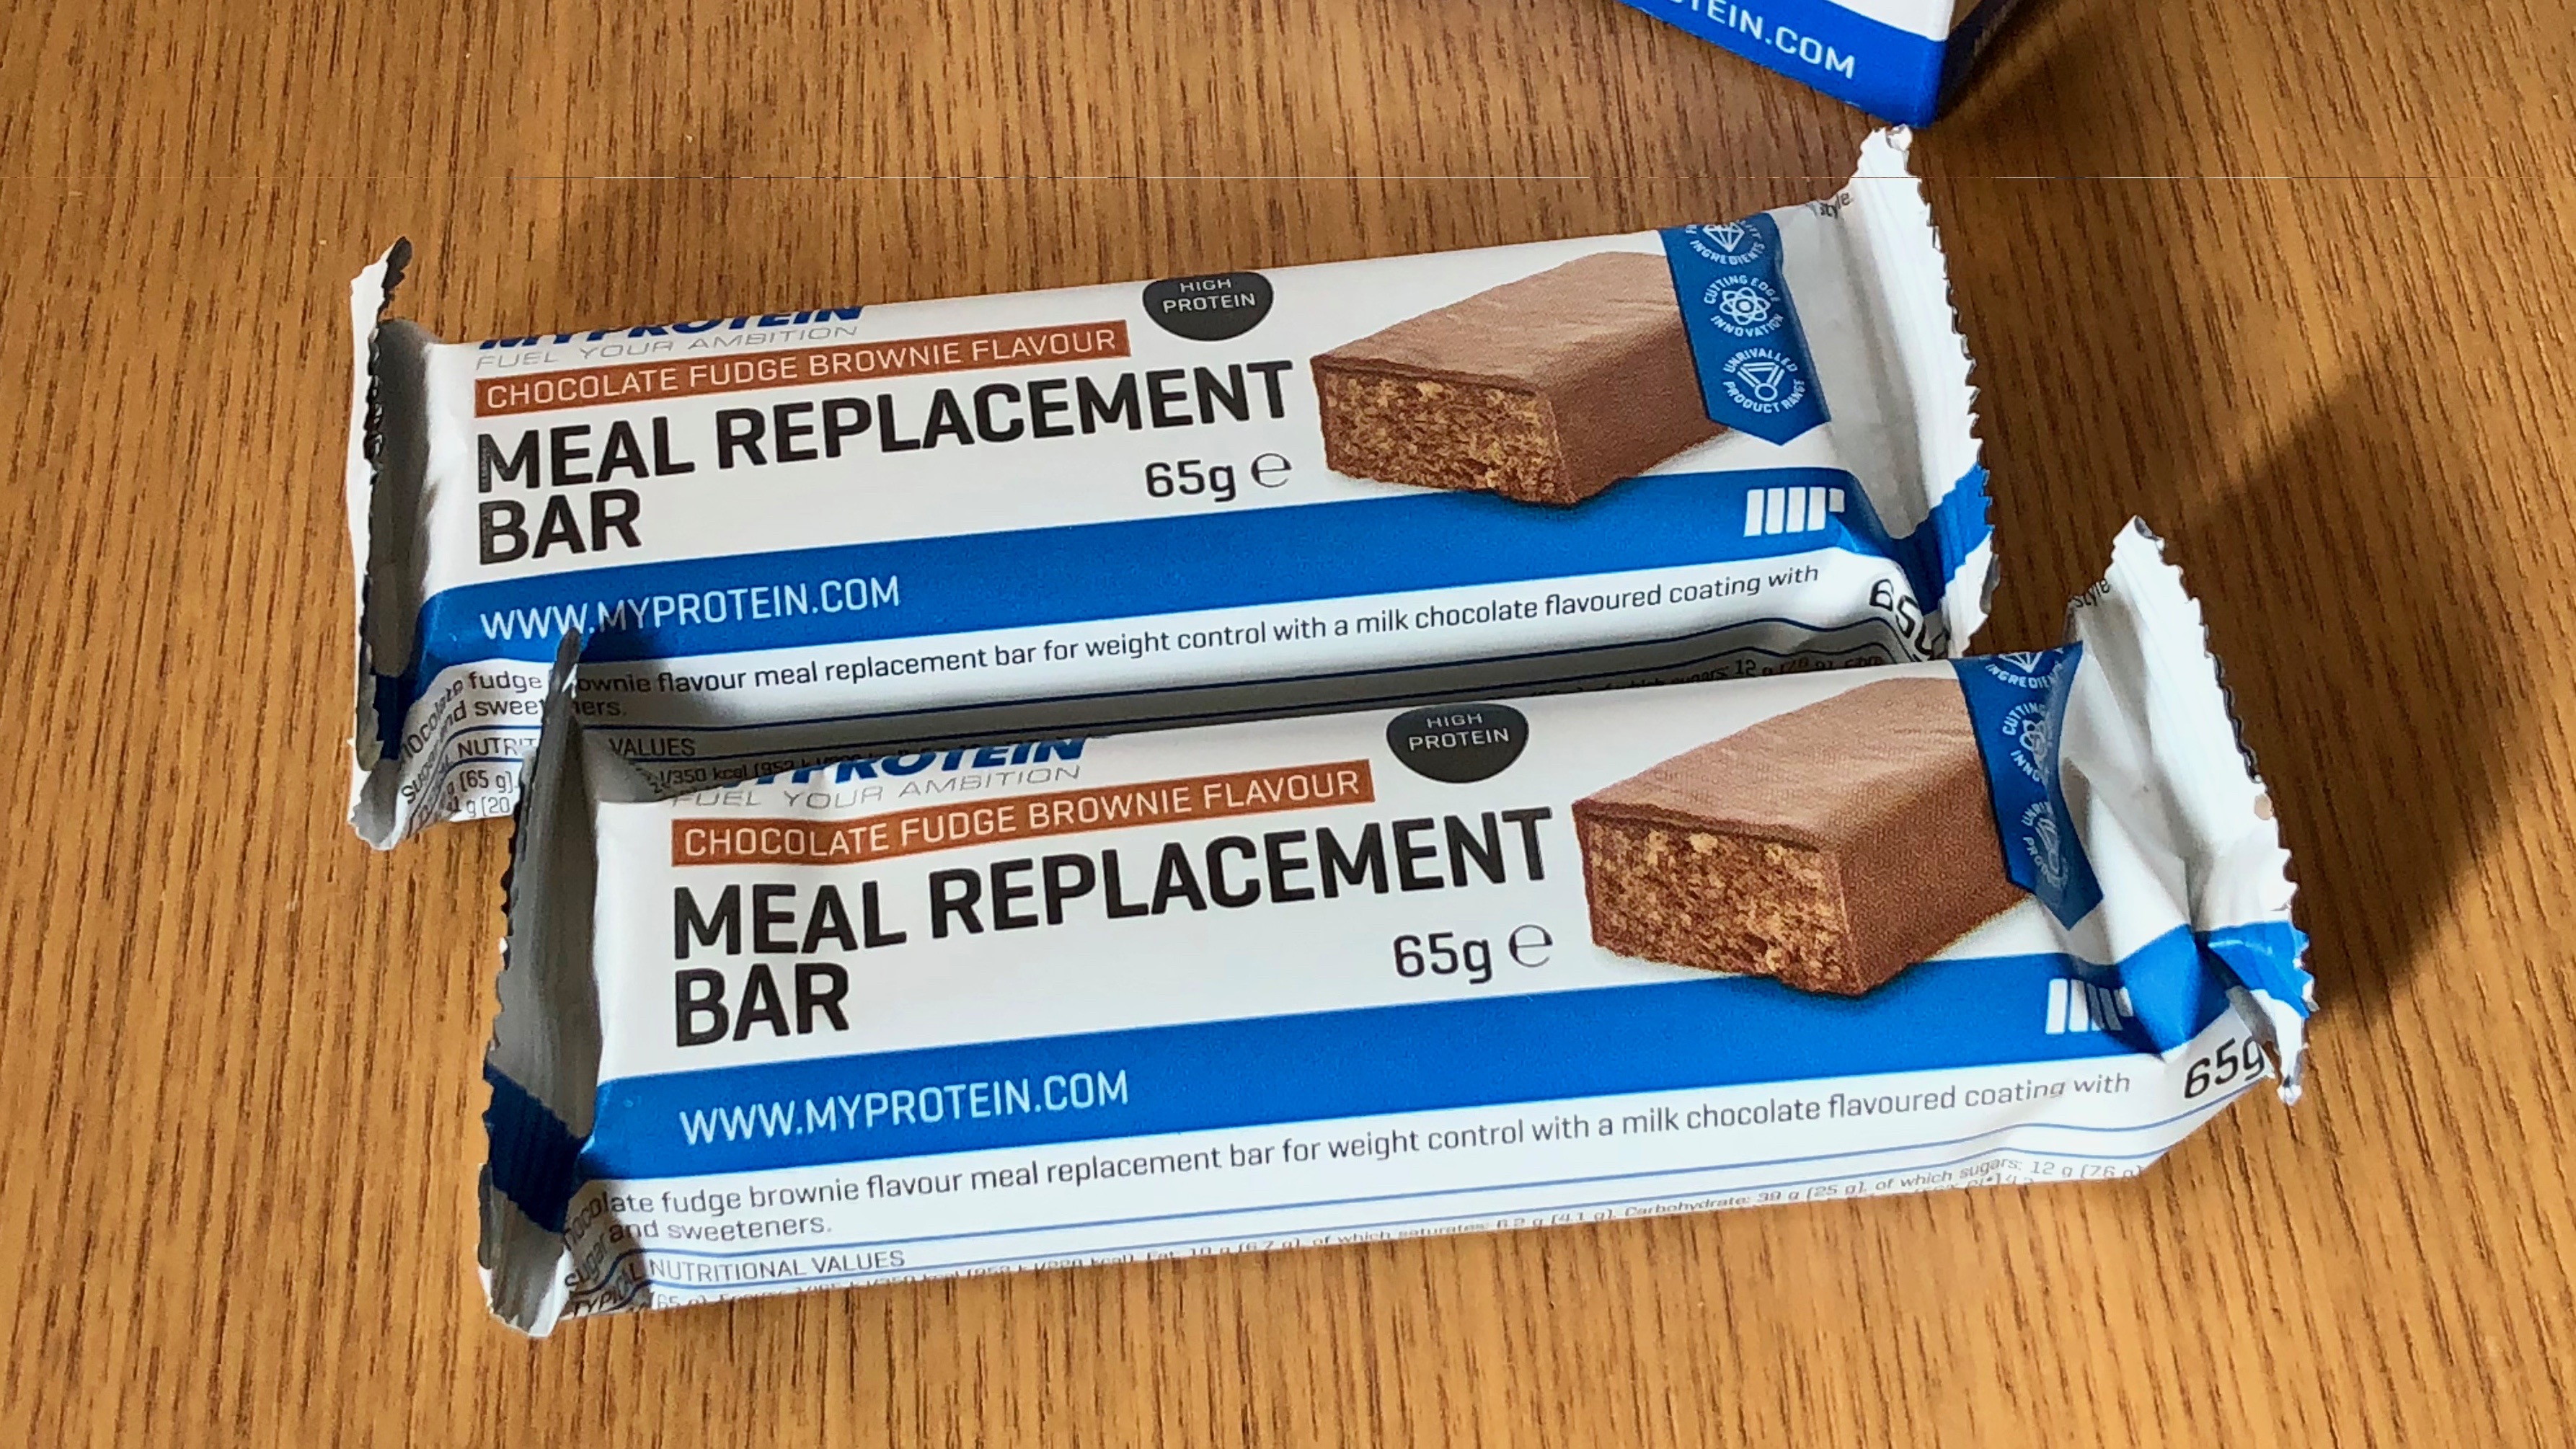 MEAL REPLACEMENT BAR